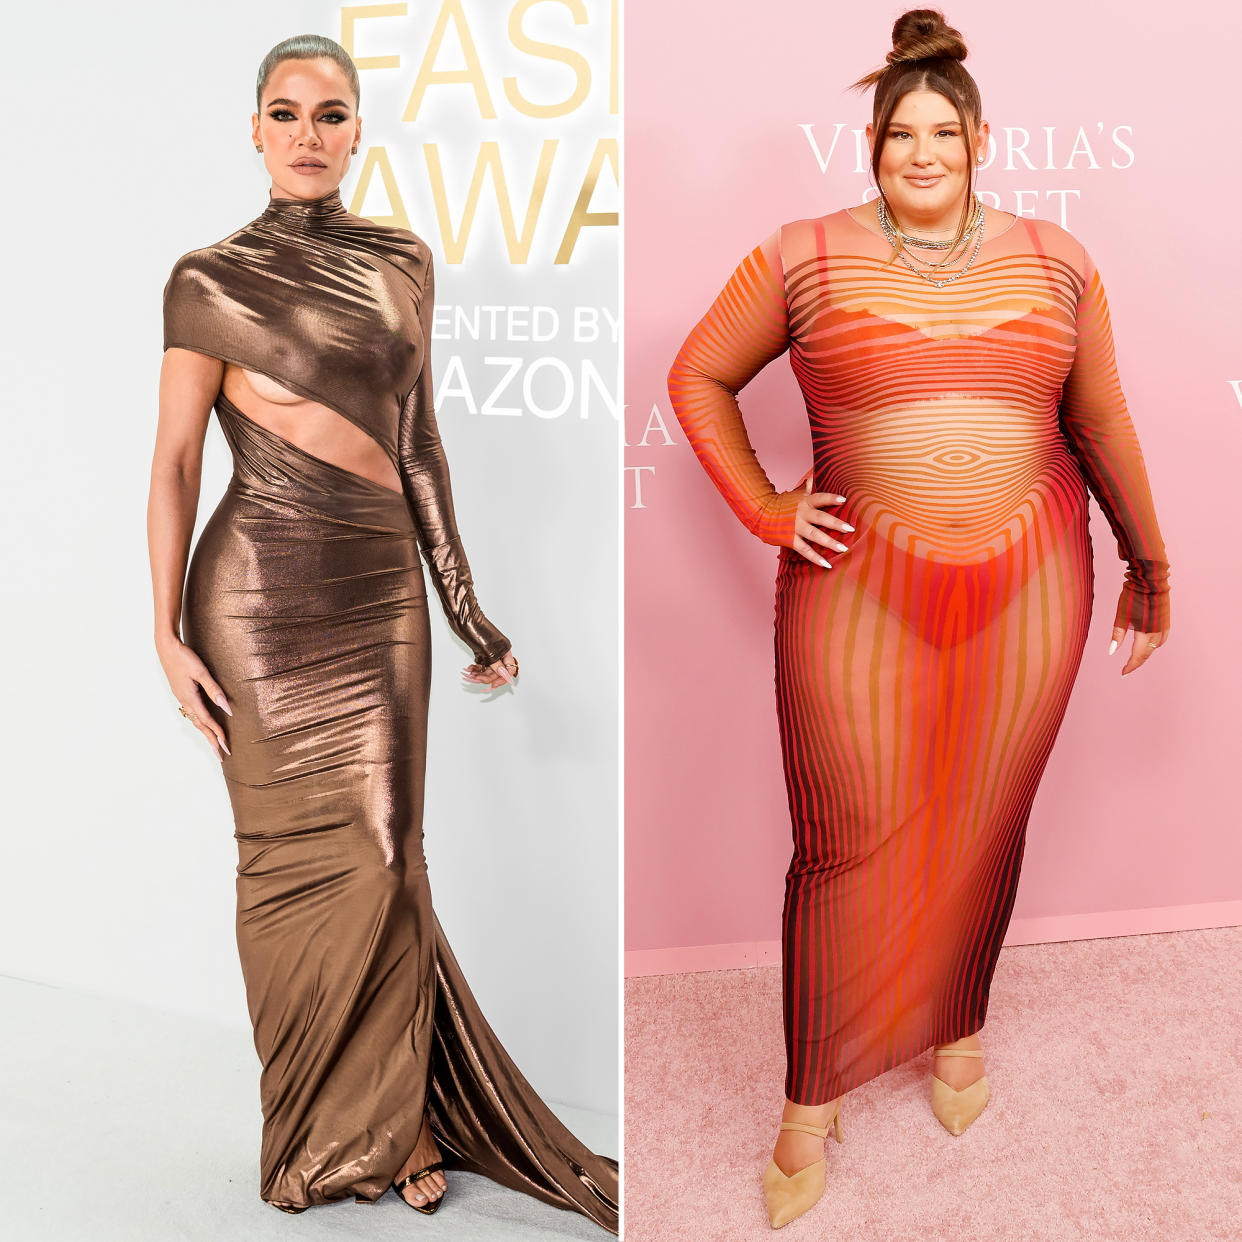 Khloe Kardashian Calls Remi Bader ‘Perfection’ After the Model Responds to Body Shaming Comments